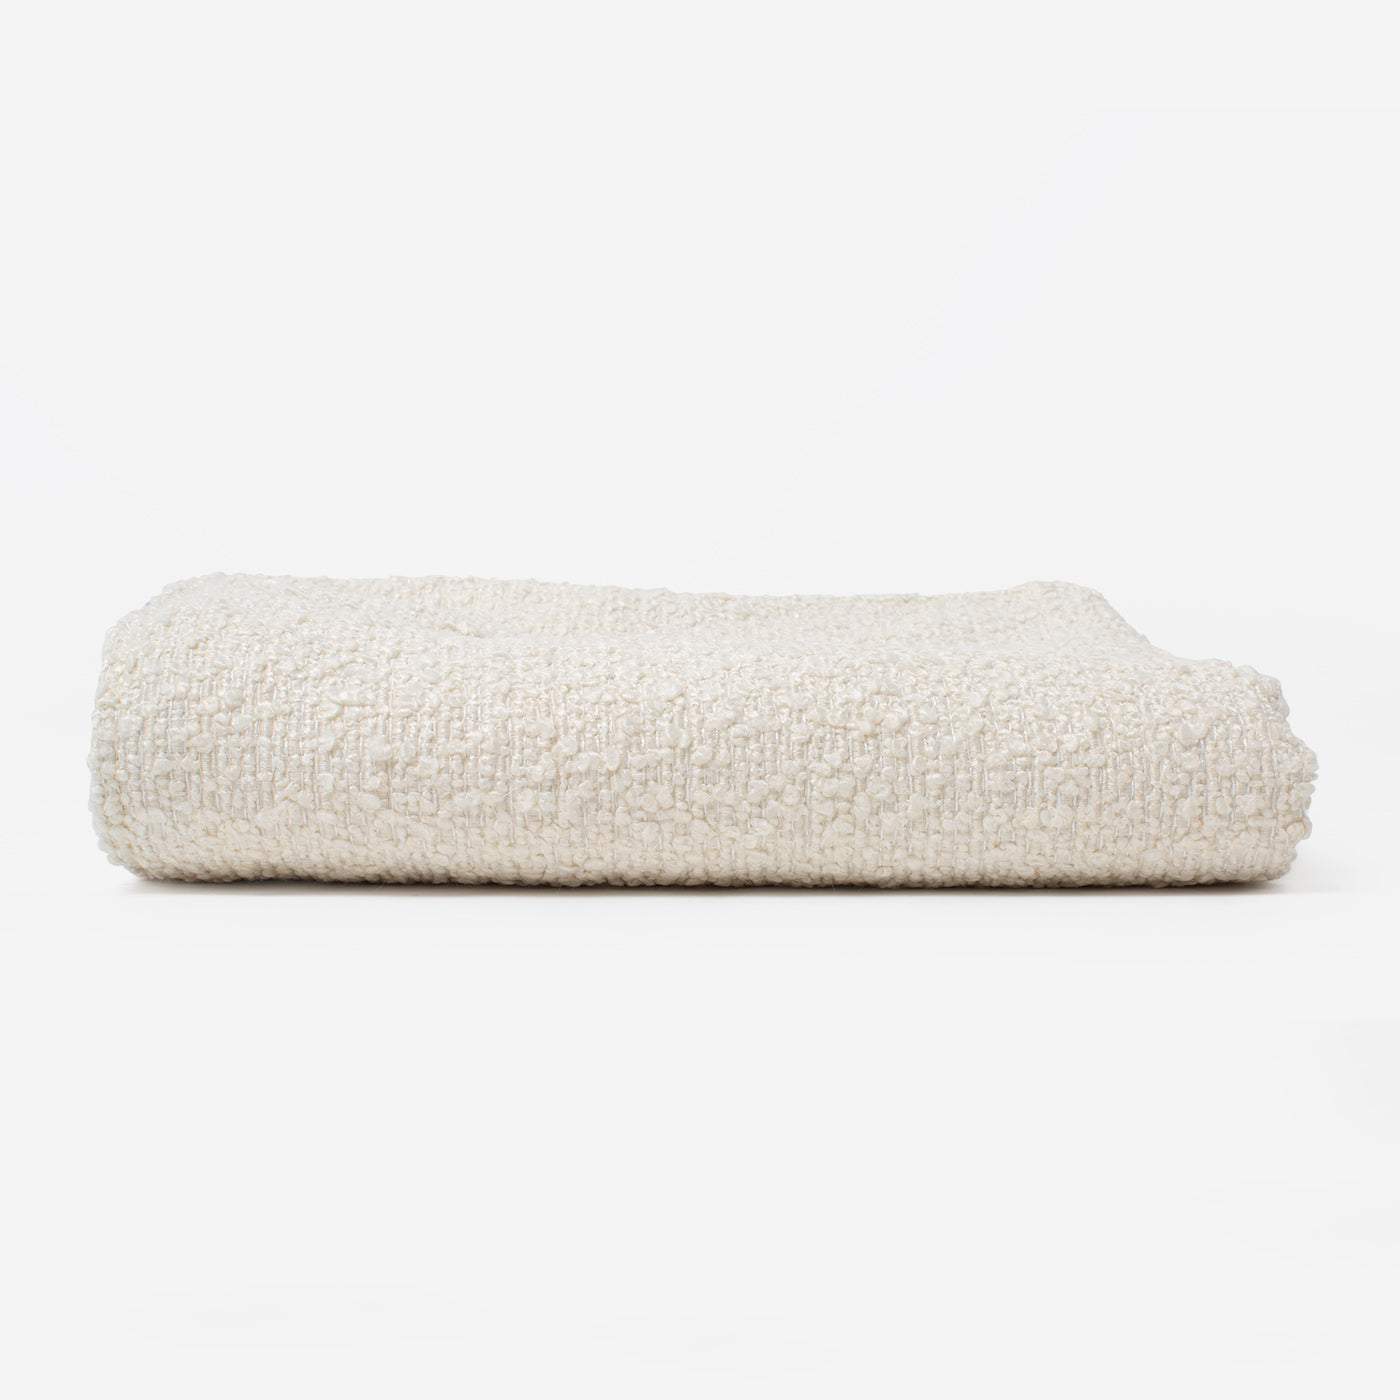 [color:Ivory Boucle] Super Soft Sherpa & Teddy Fleece Lining, Our Luxury Cat & Kitten Blanket In Stunning Boucle I The Perfect Cat Bed Accessory! Available Now at Lords & Labradors US